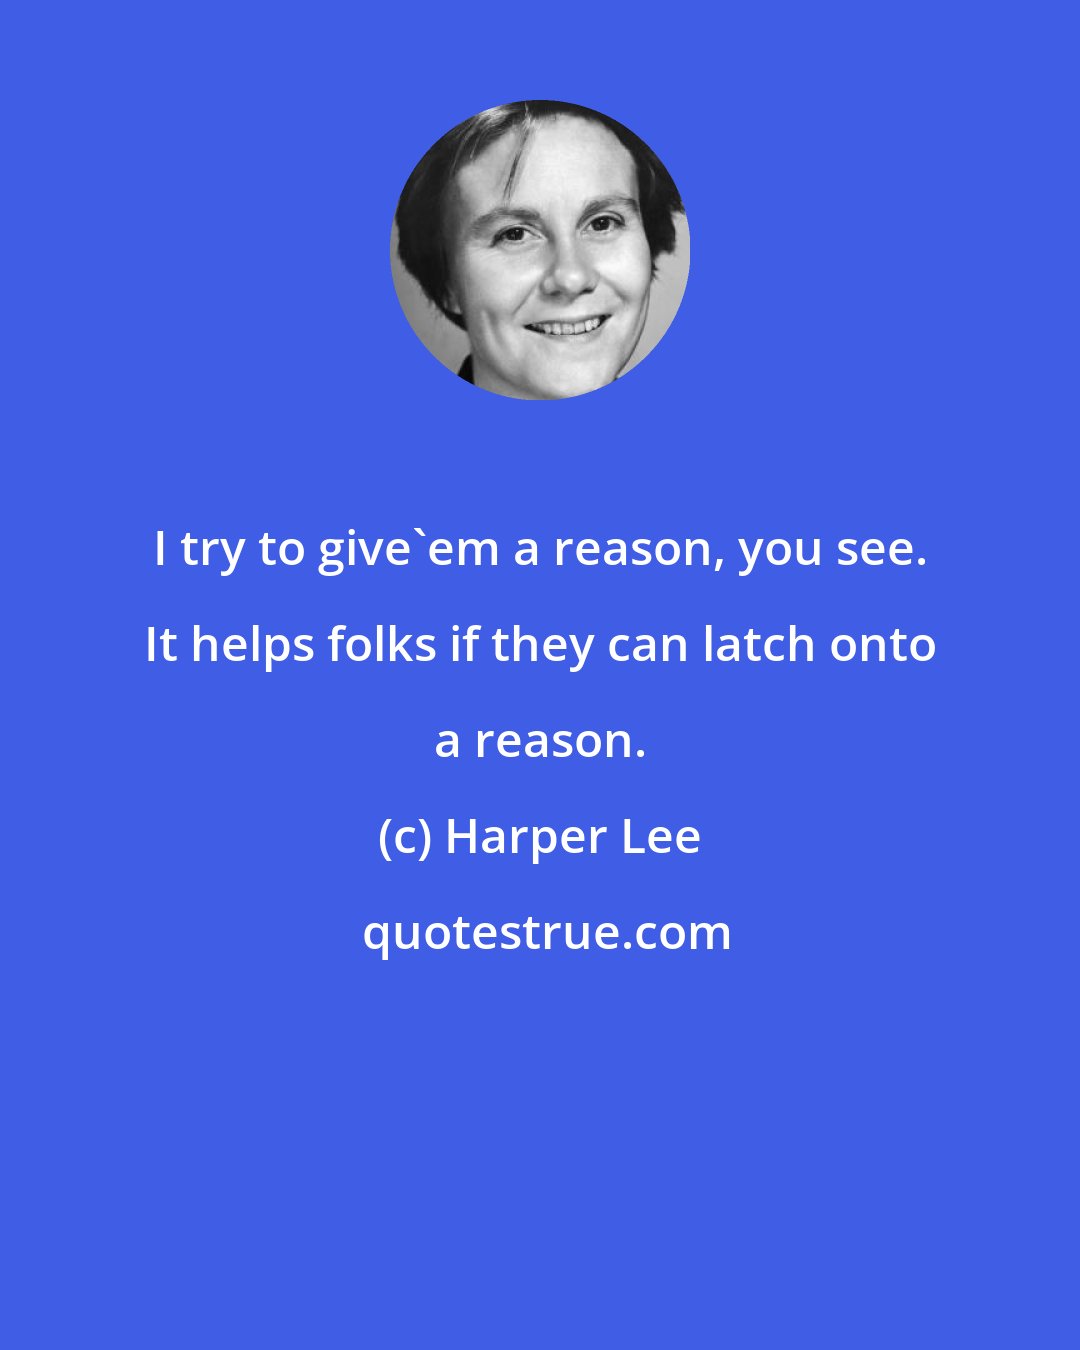 Harper Lee: I try to give'em a reason, you see. It helps folks if they can latch onto a reason.